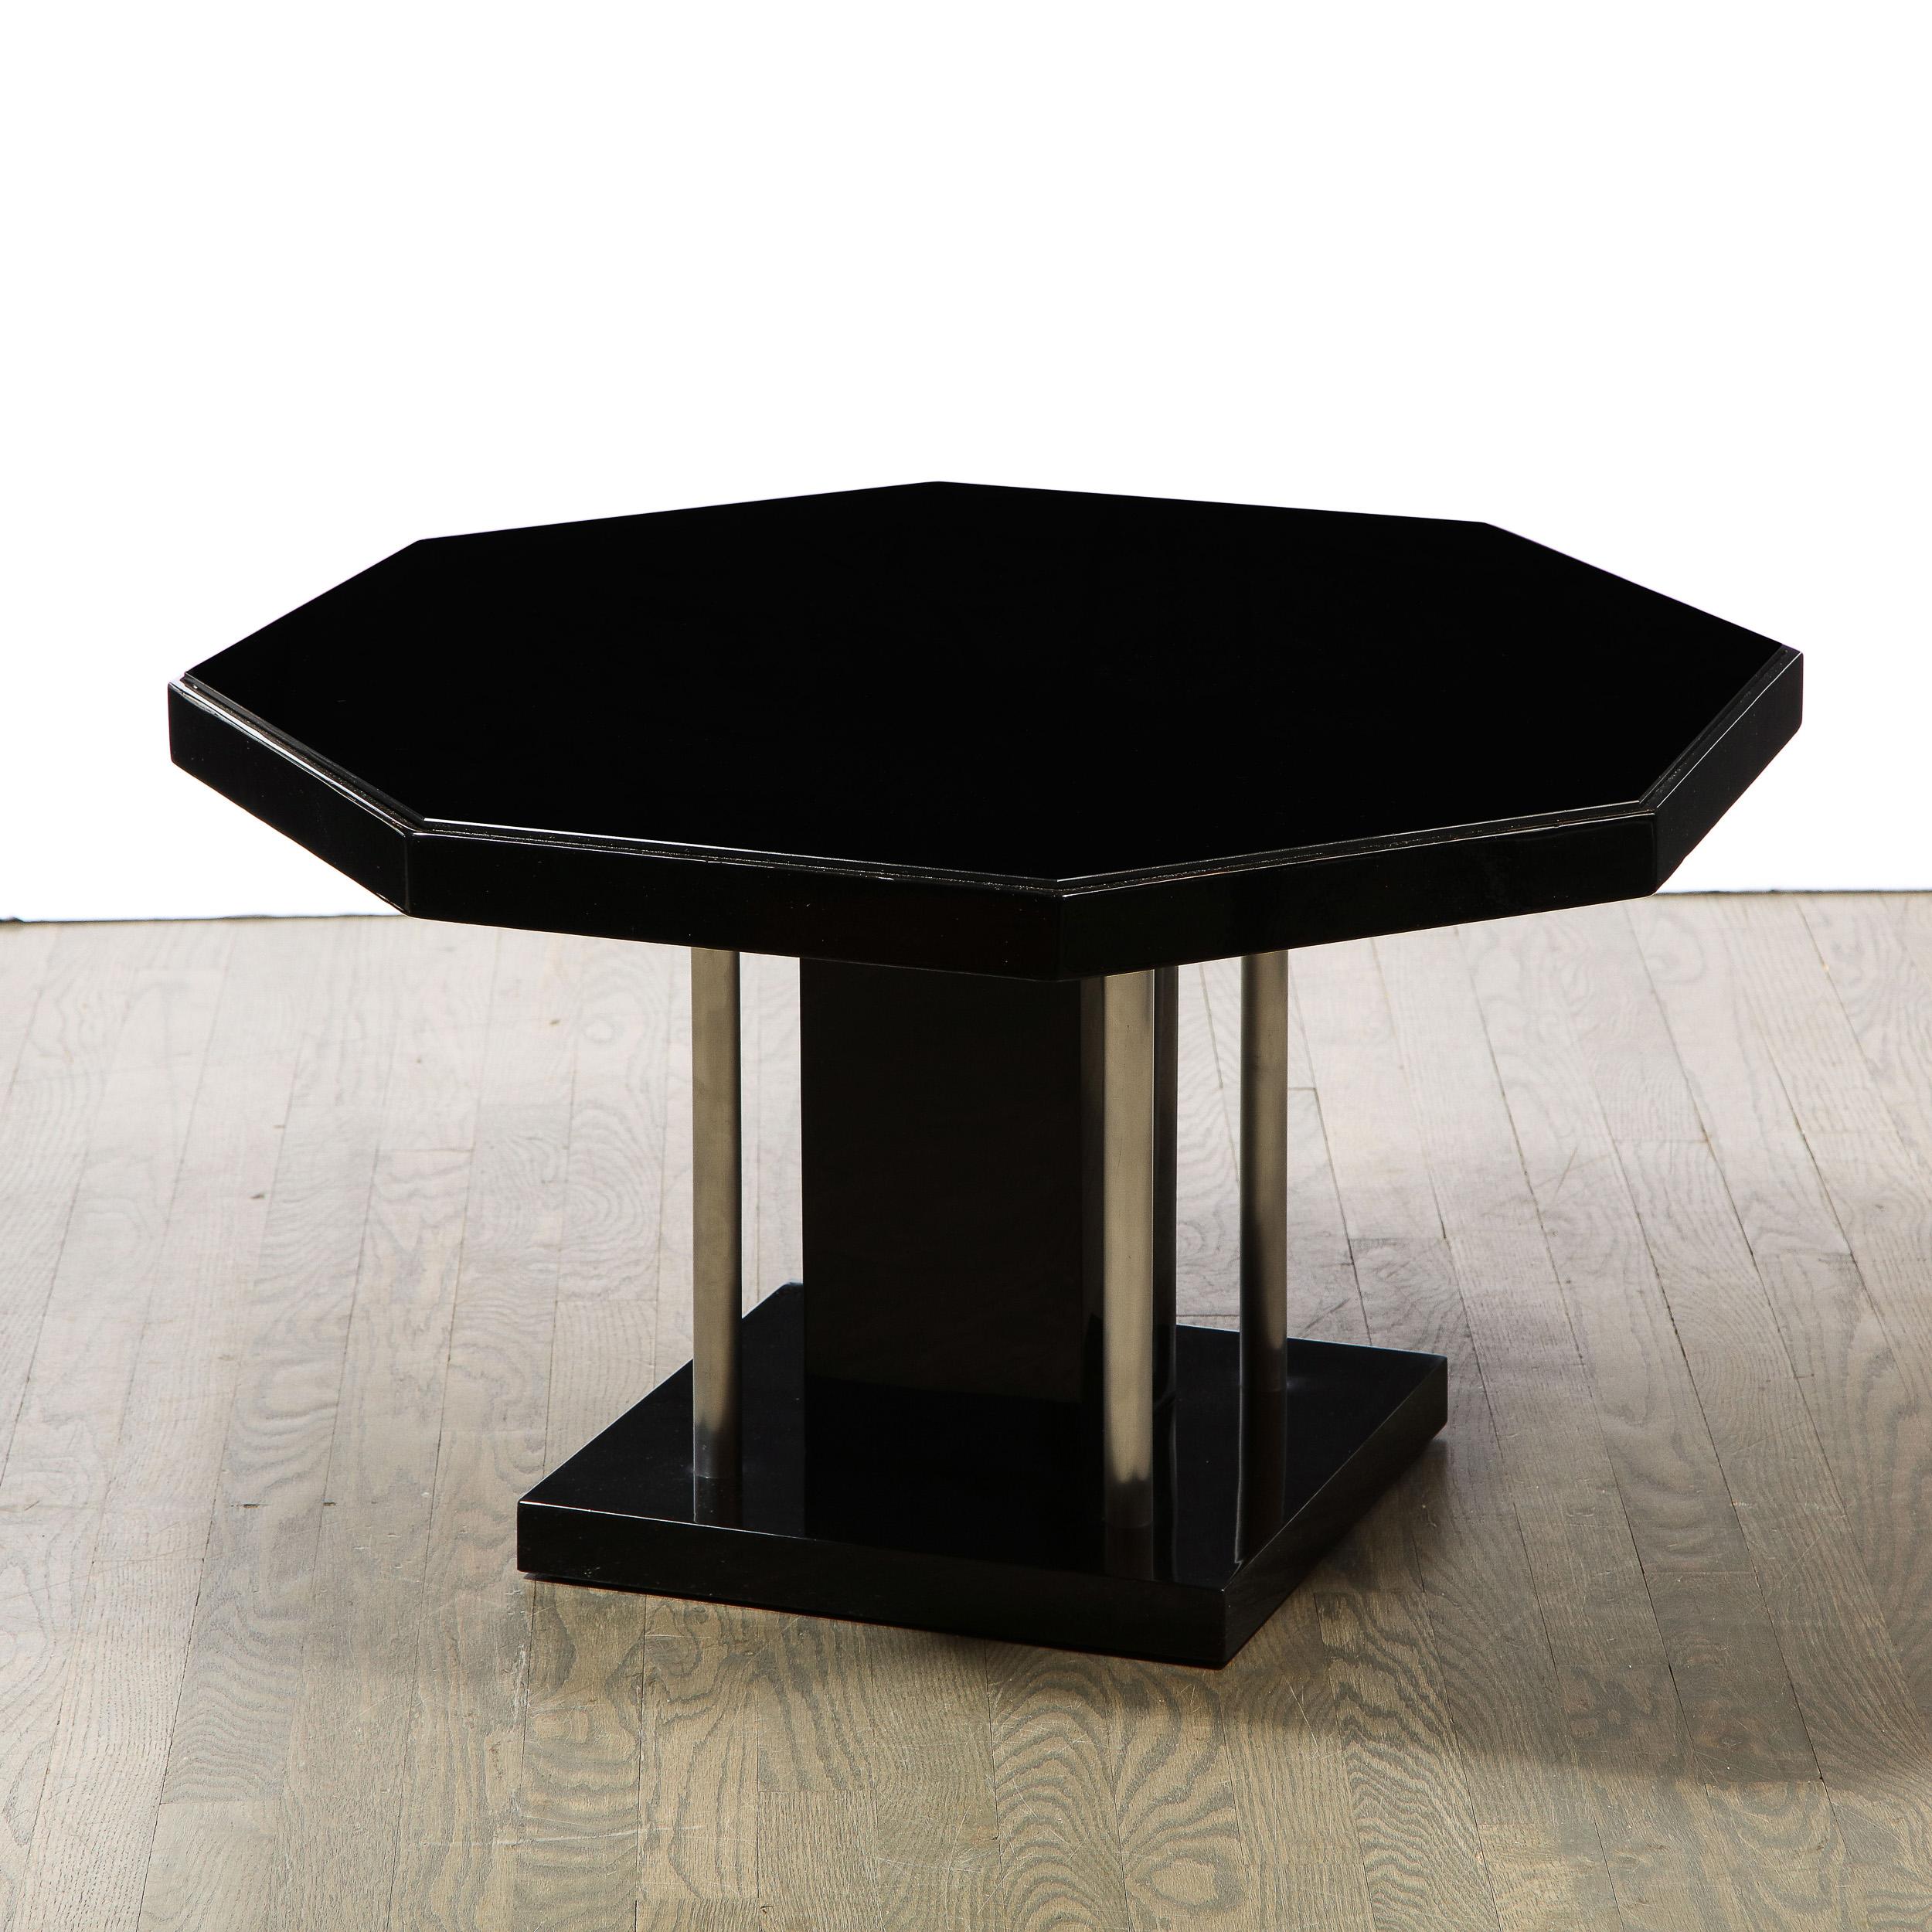 This stunning Art Deco Machine Age cocktail table was realized in the United States circa 1935. It features a square base; a volumetric rectangular body and an octagonal top- all in lustrous black lacquer- with a vitrolite inset. Additionally, the